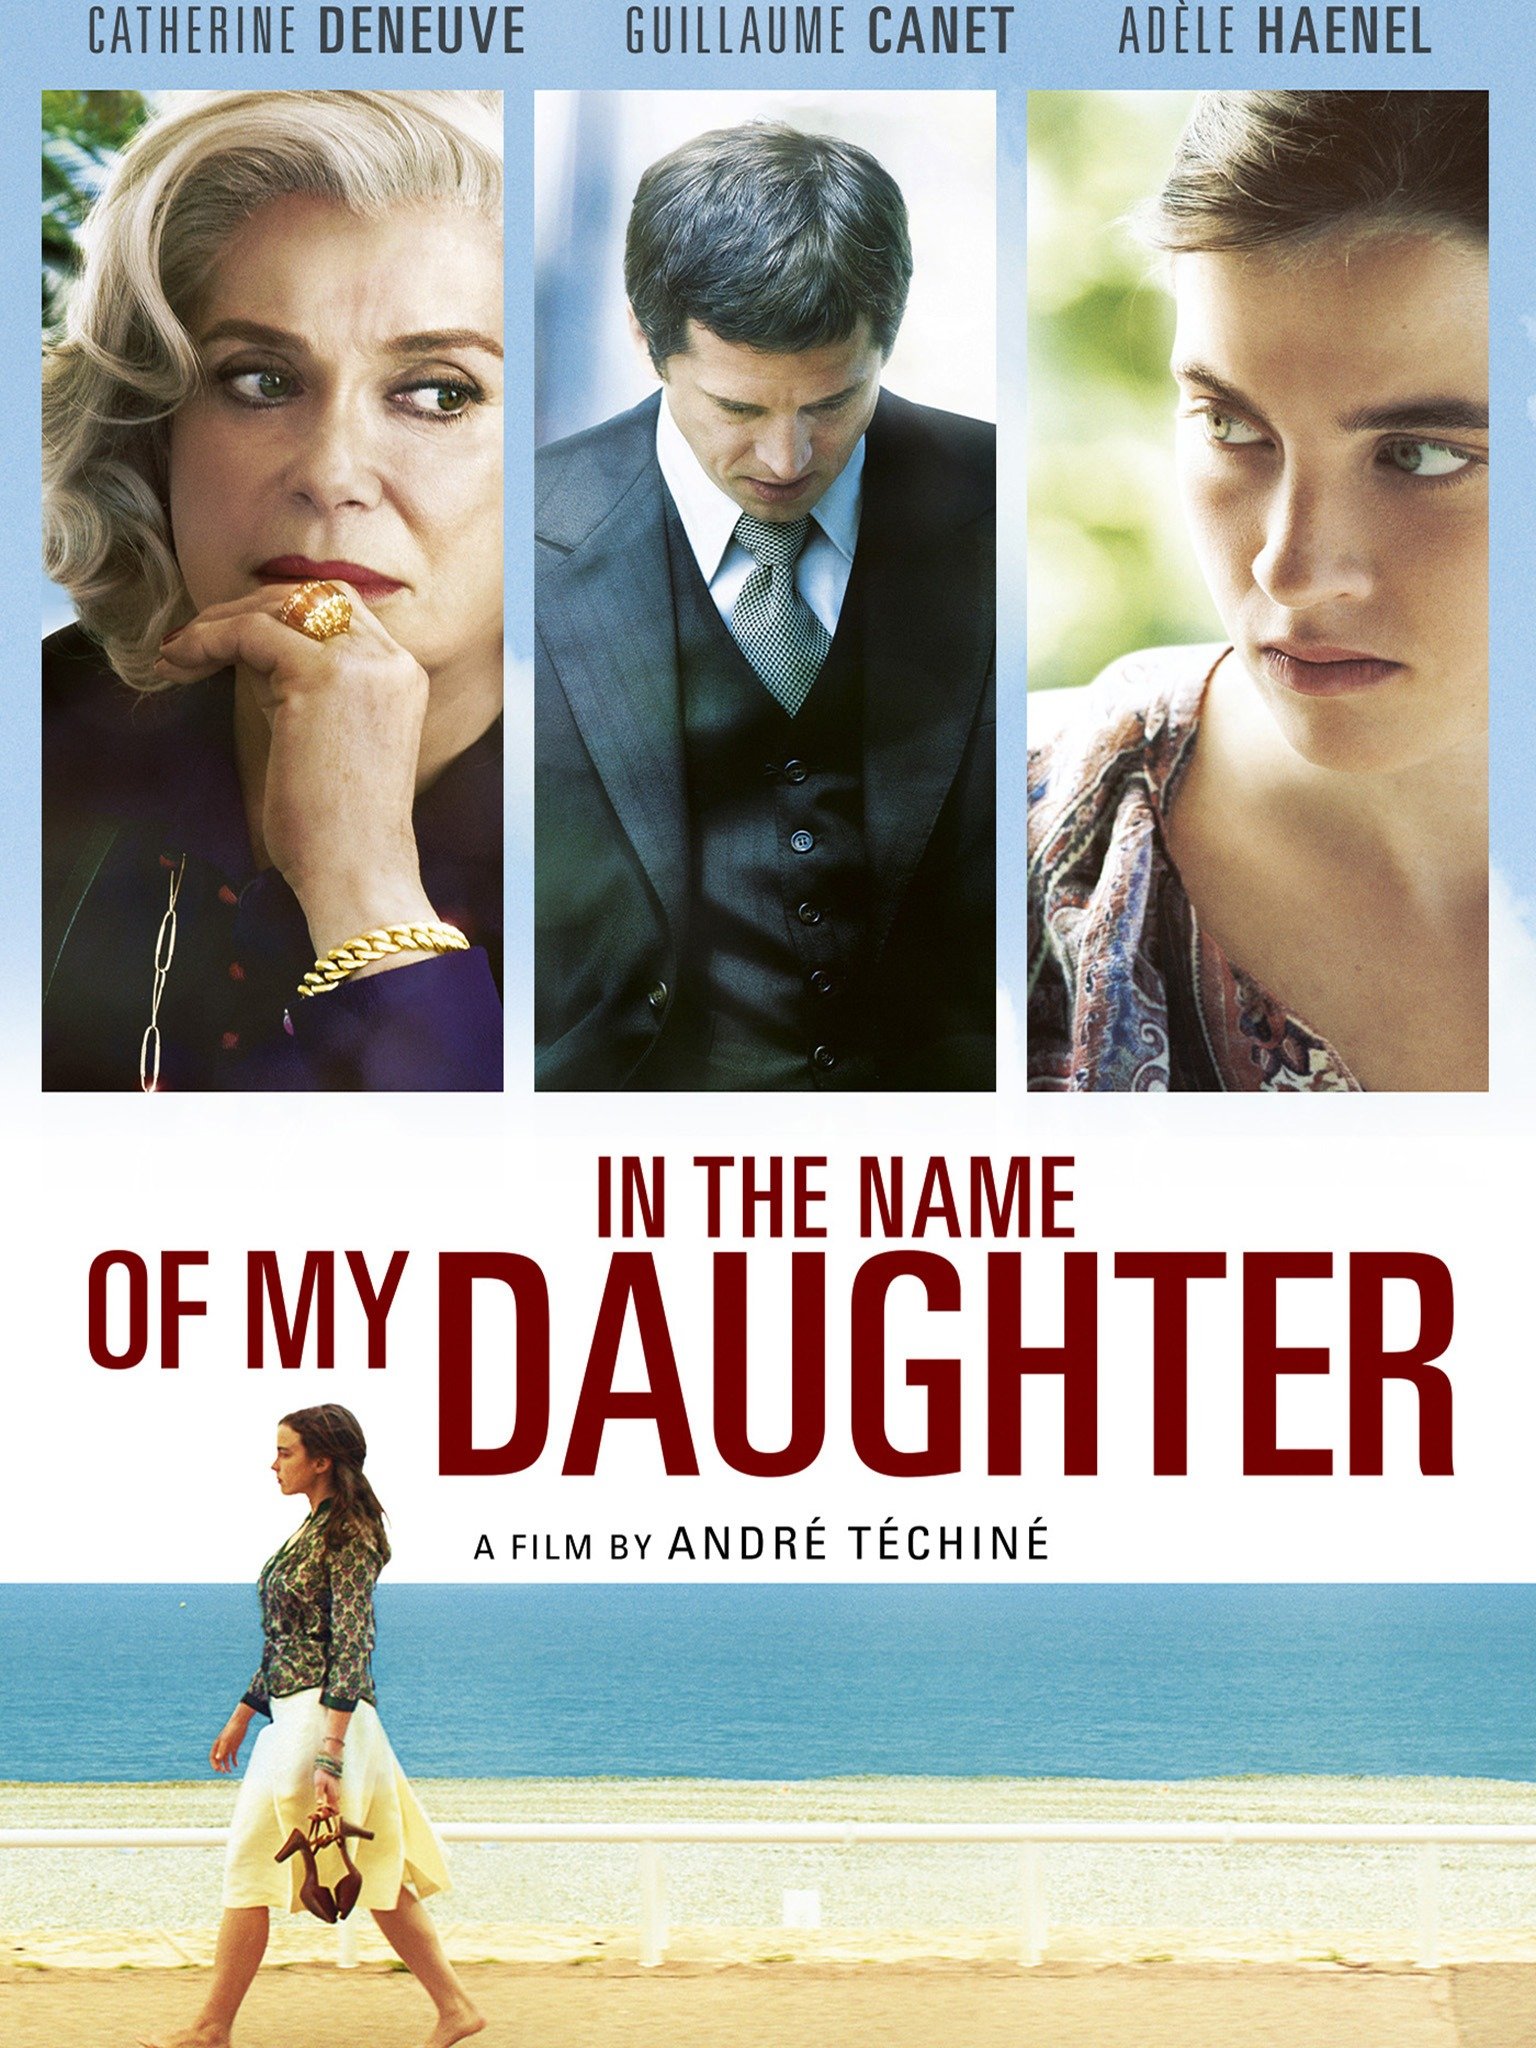 IN THE NAME OF MY DAUGHTER